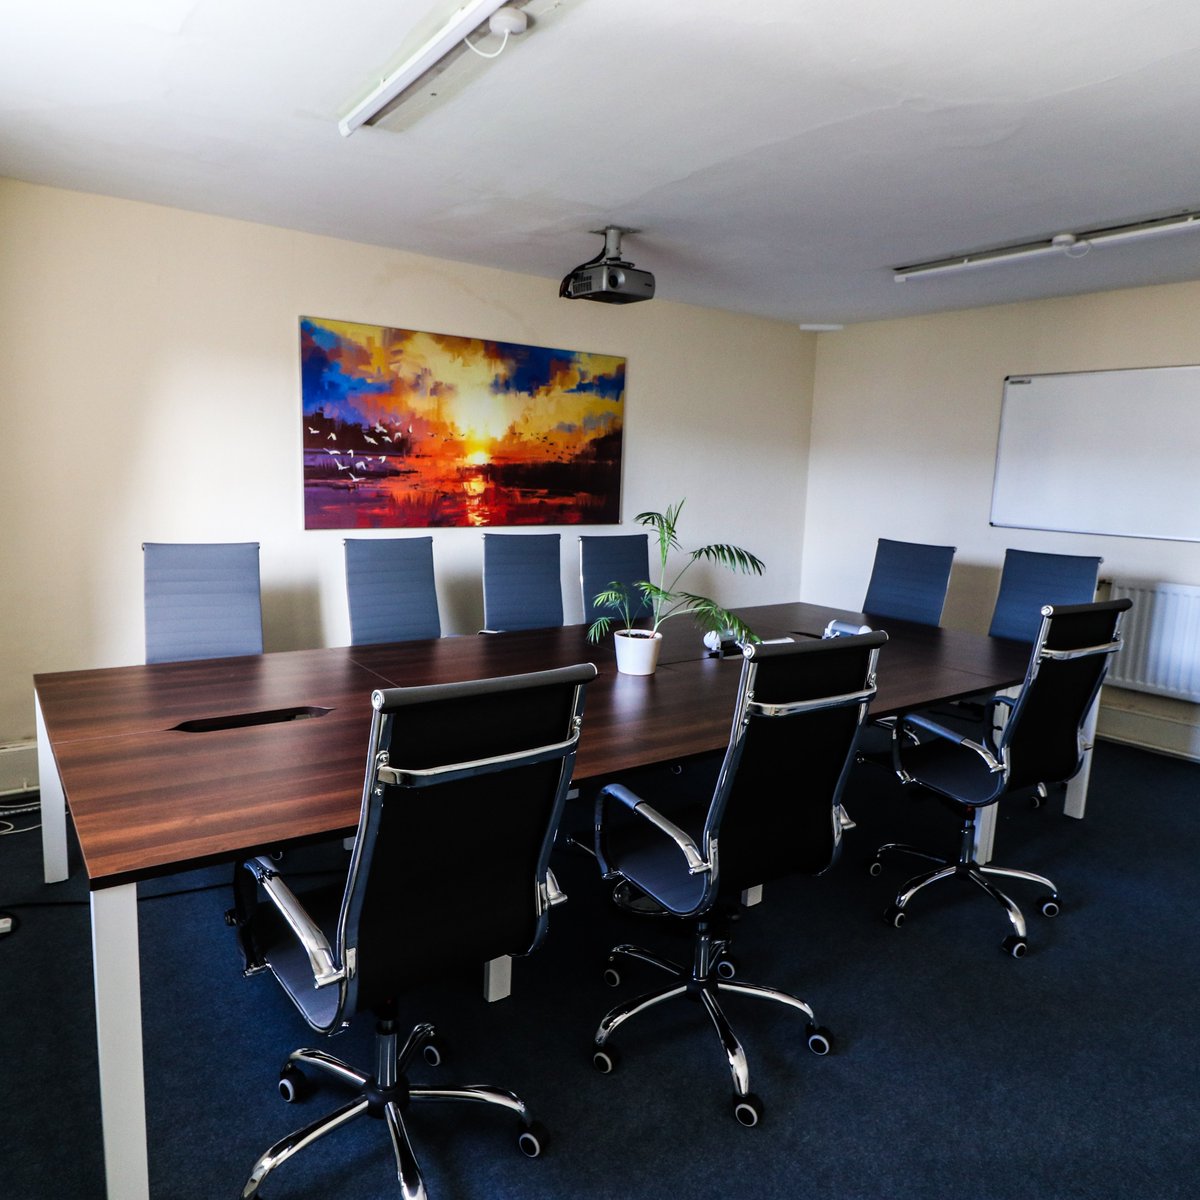 Meeting rooms for #hire in #Gloucester City centre! Whether you’re a community group, a local service provider, or a business looking for a place to meet your clients, these #meetingrooms are ideal. Call us today on 01452 528491 for availability or visit: grcc.org.uk/meeting-room-h…